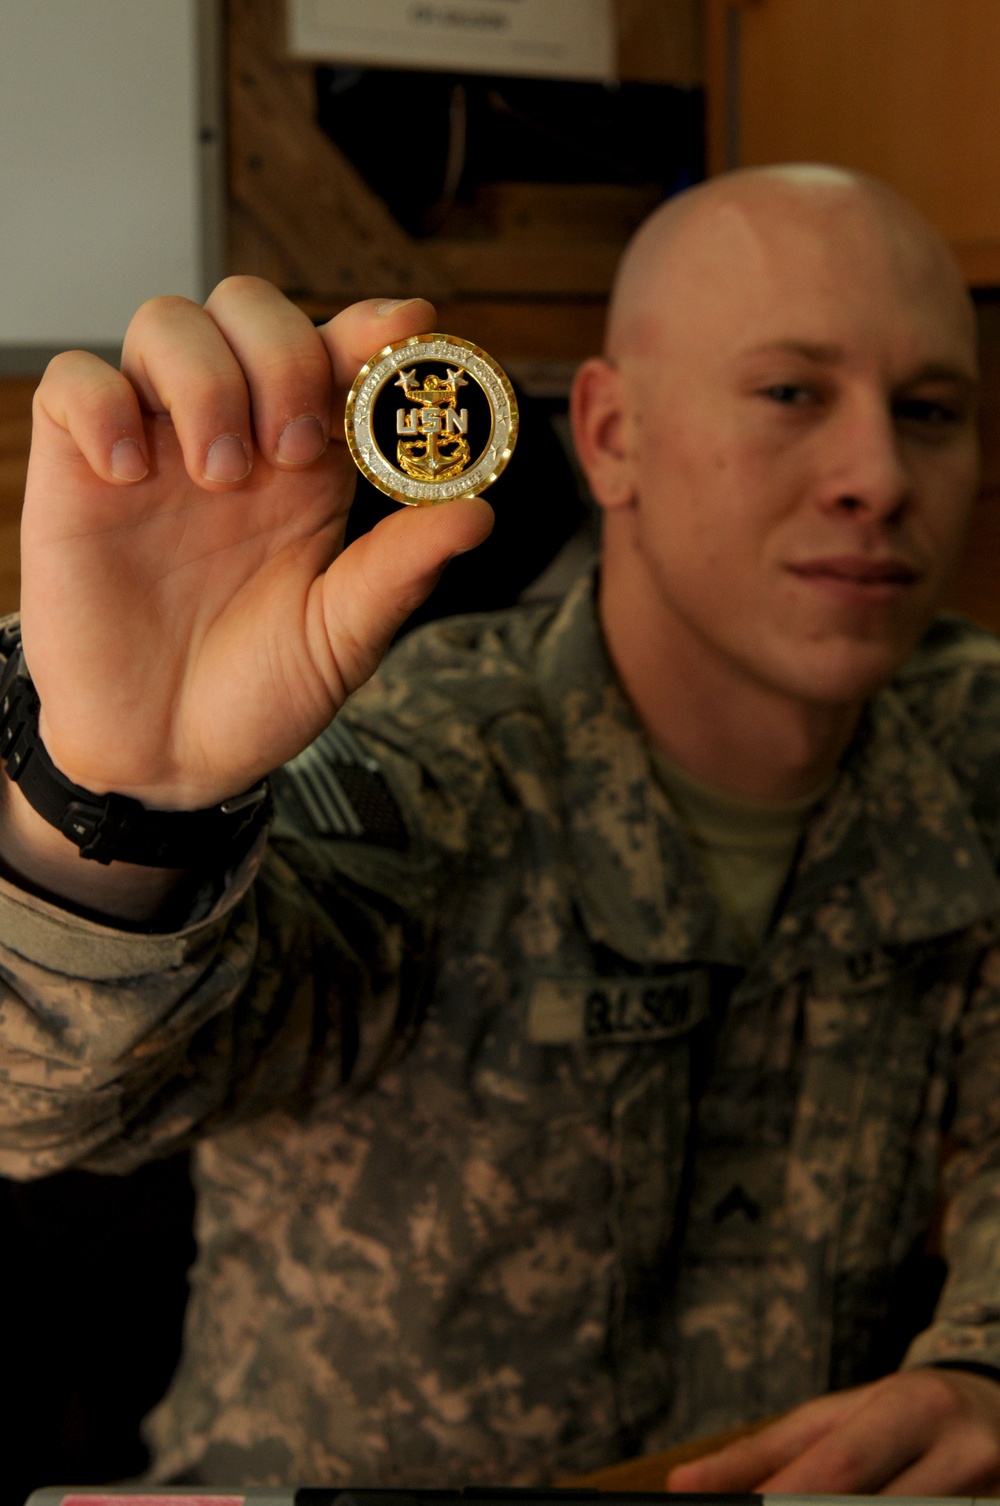 Challenge coins: more than just metal